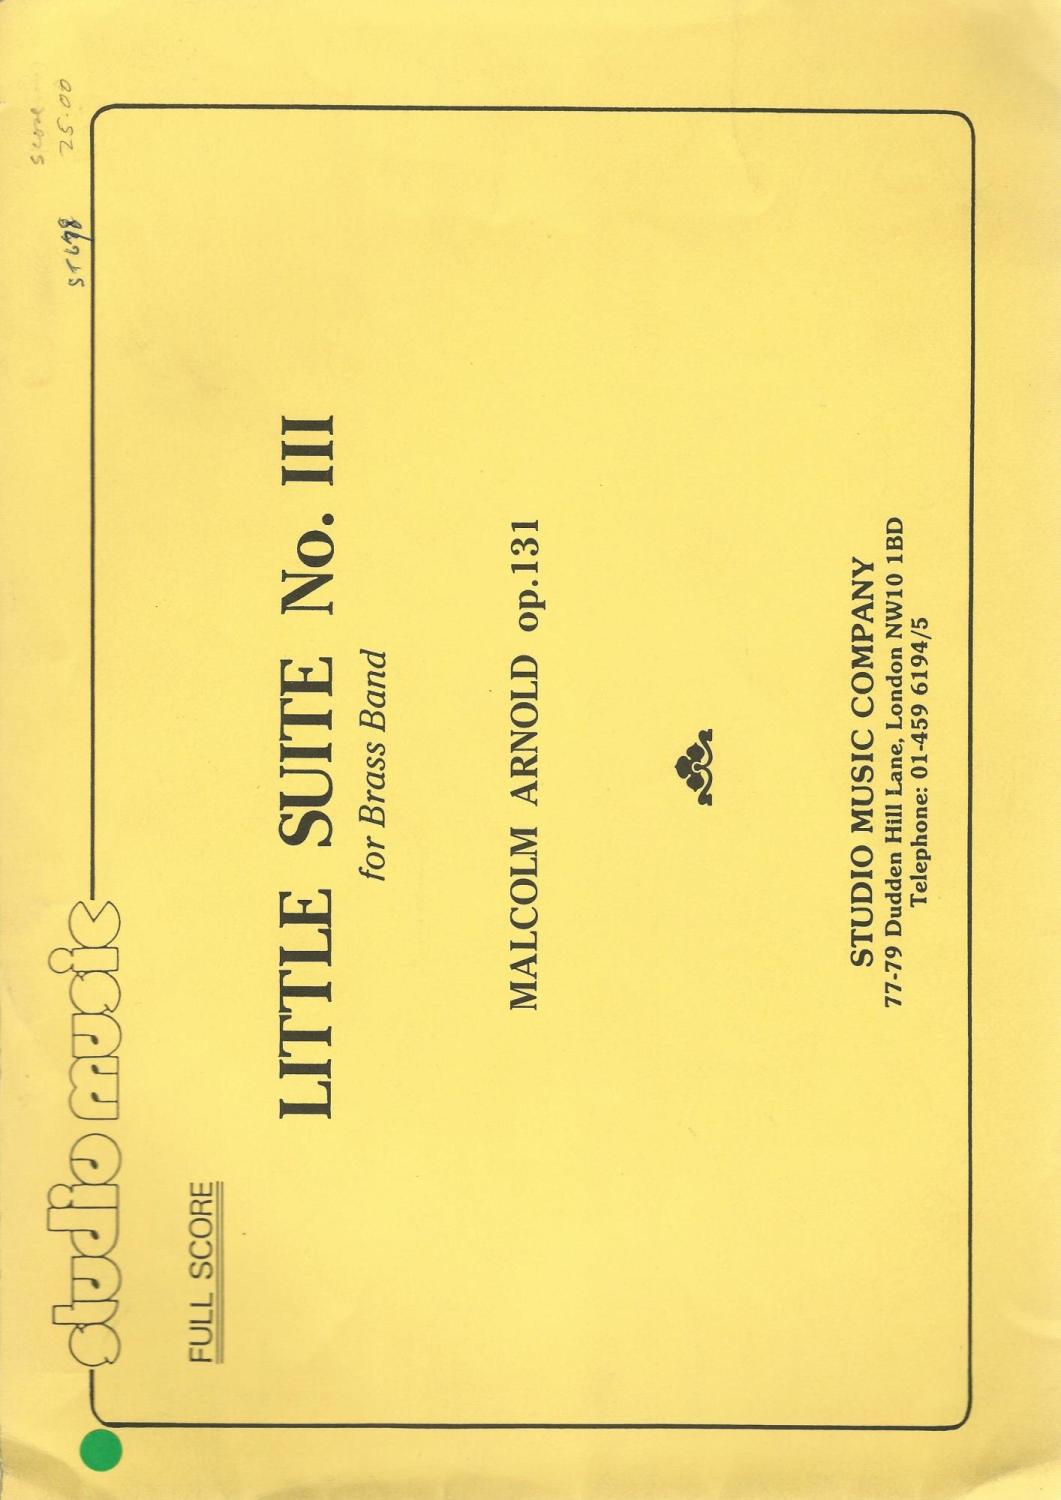 Little Suite No. III for Brass Band (Score Only) - Malcolm Arnold